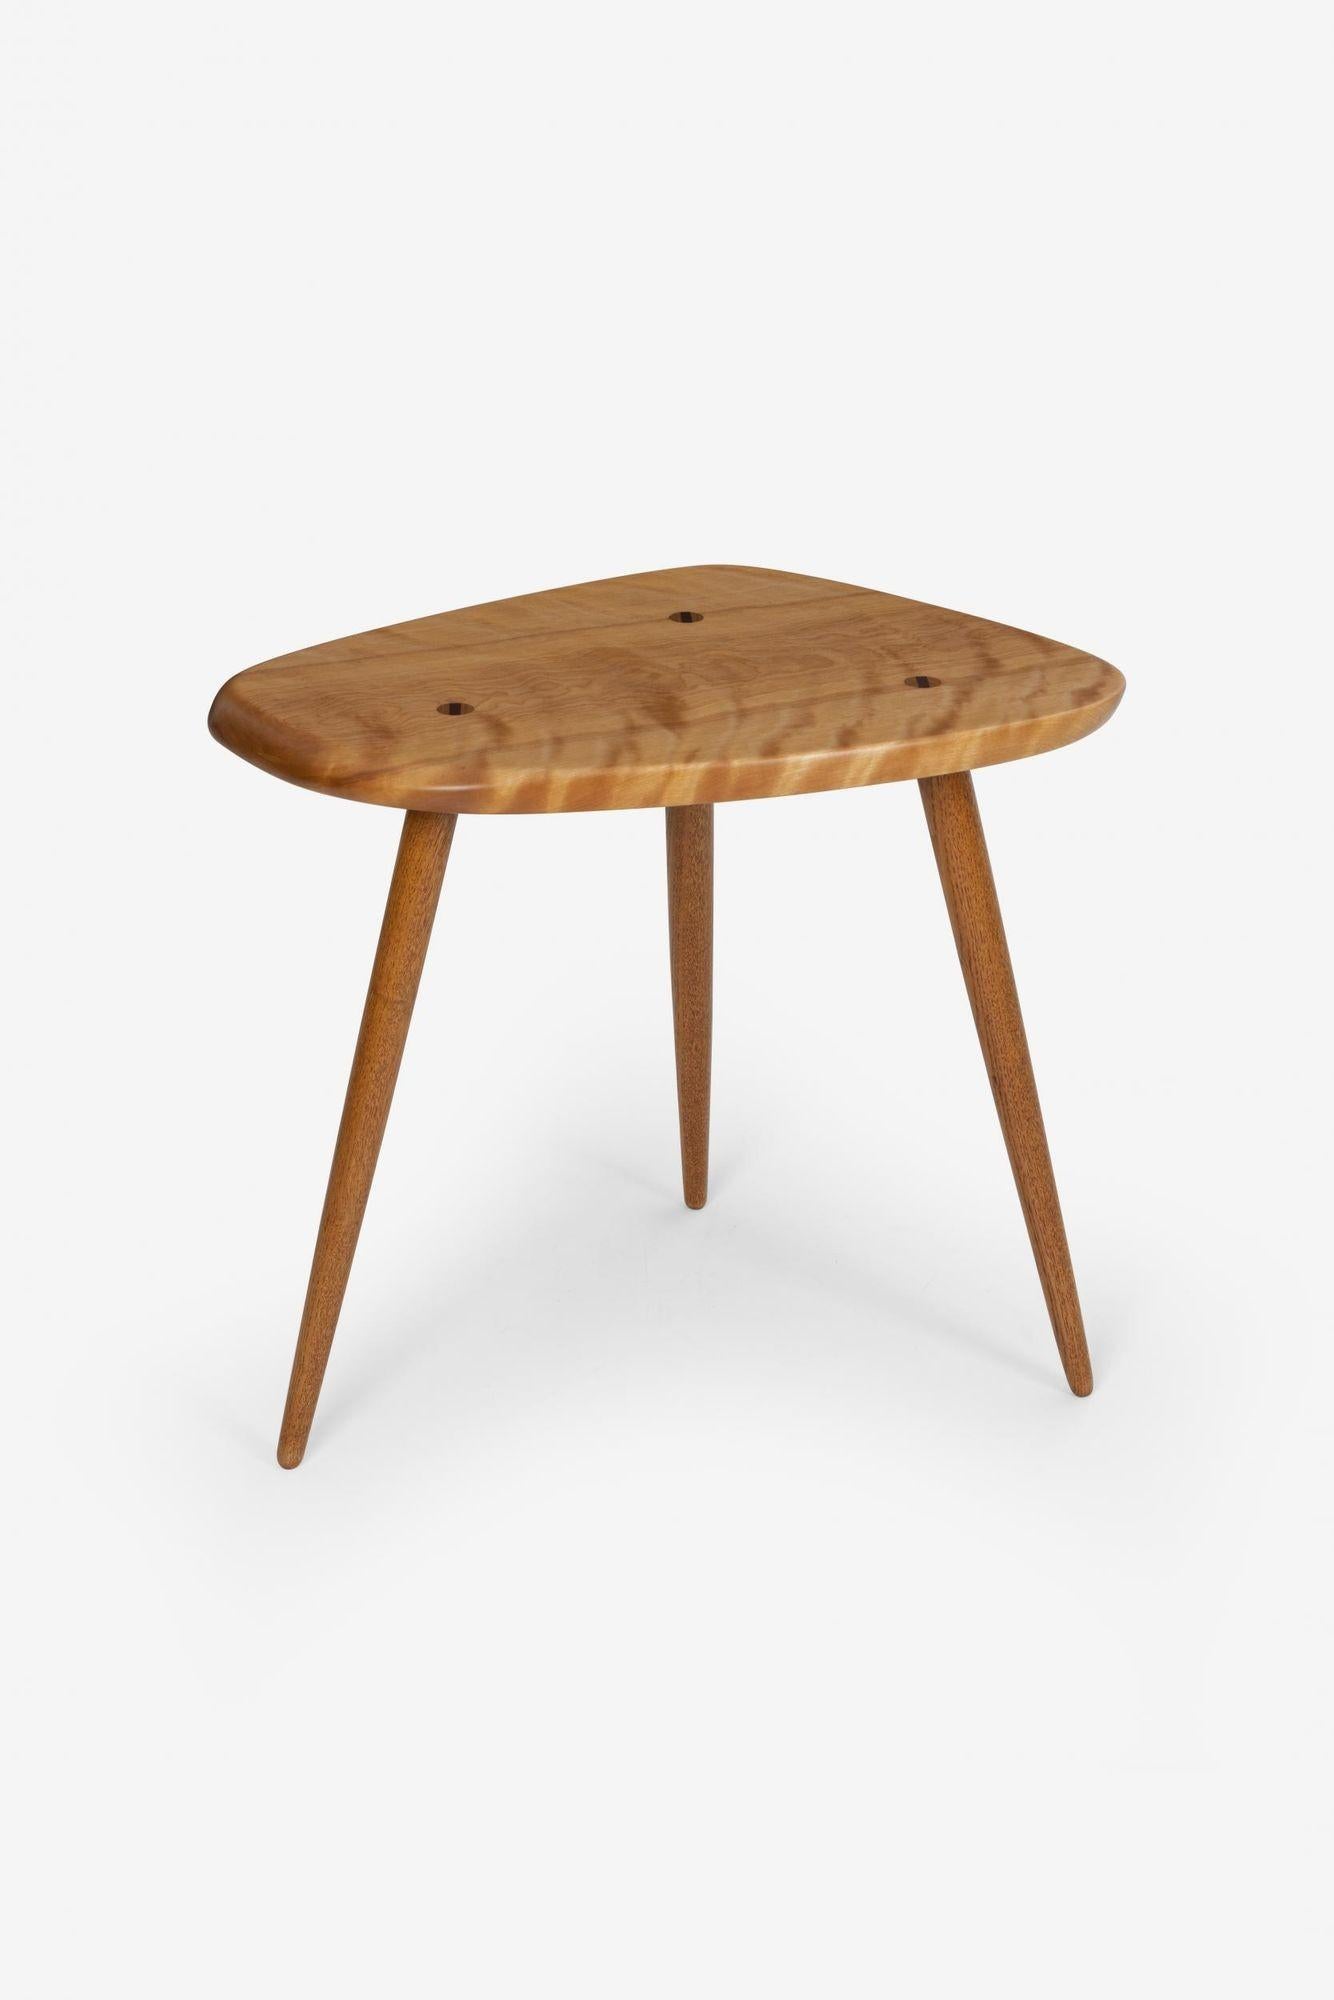 Arthur Espenet Carpenter Three-Legged Occasional Table in solid birch trapezoidal top with turned oak legs that pierce the top and are exposed as a design detail.
Signed on underside [Espenet Birch 246]